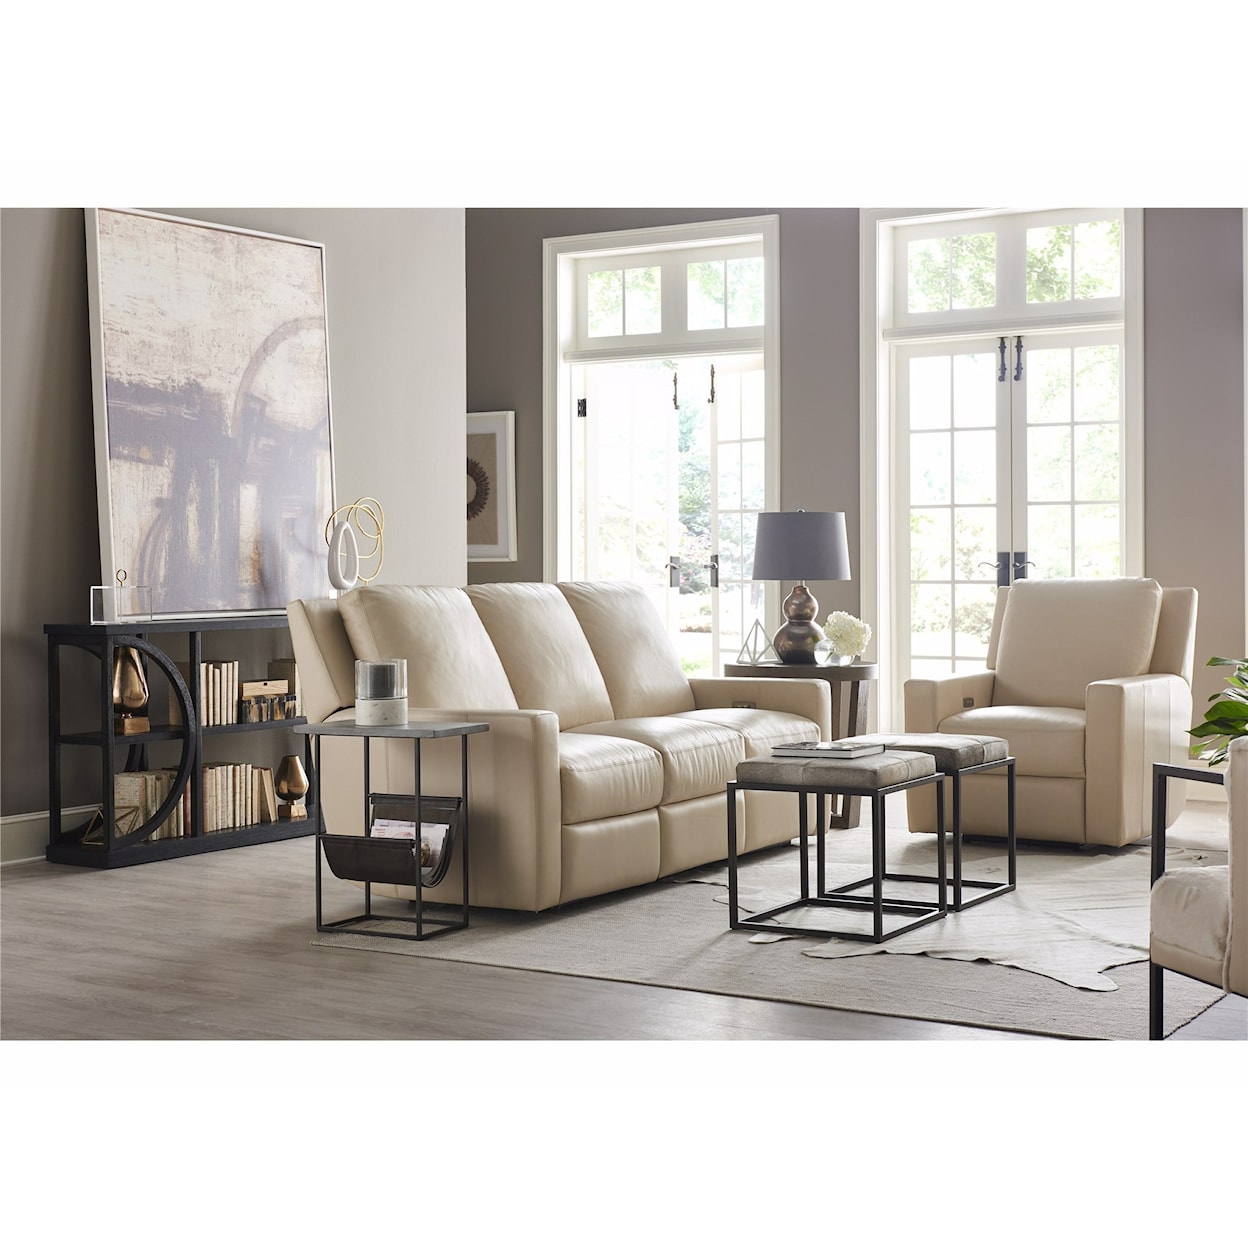 Universal Accents Accent Ottoman